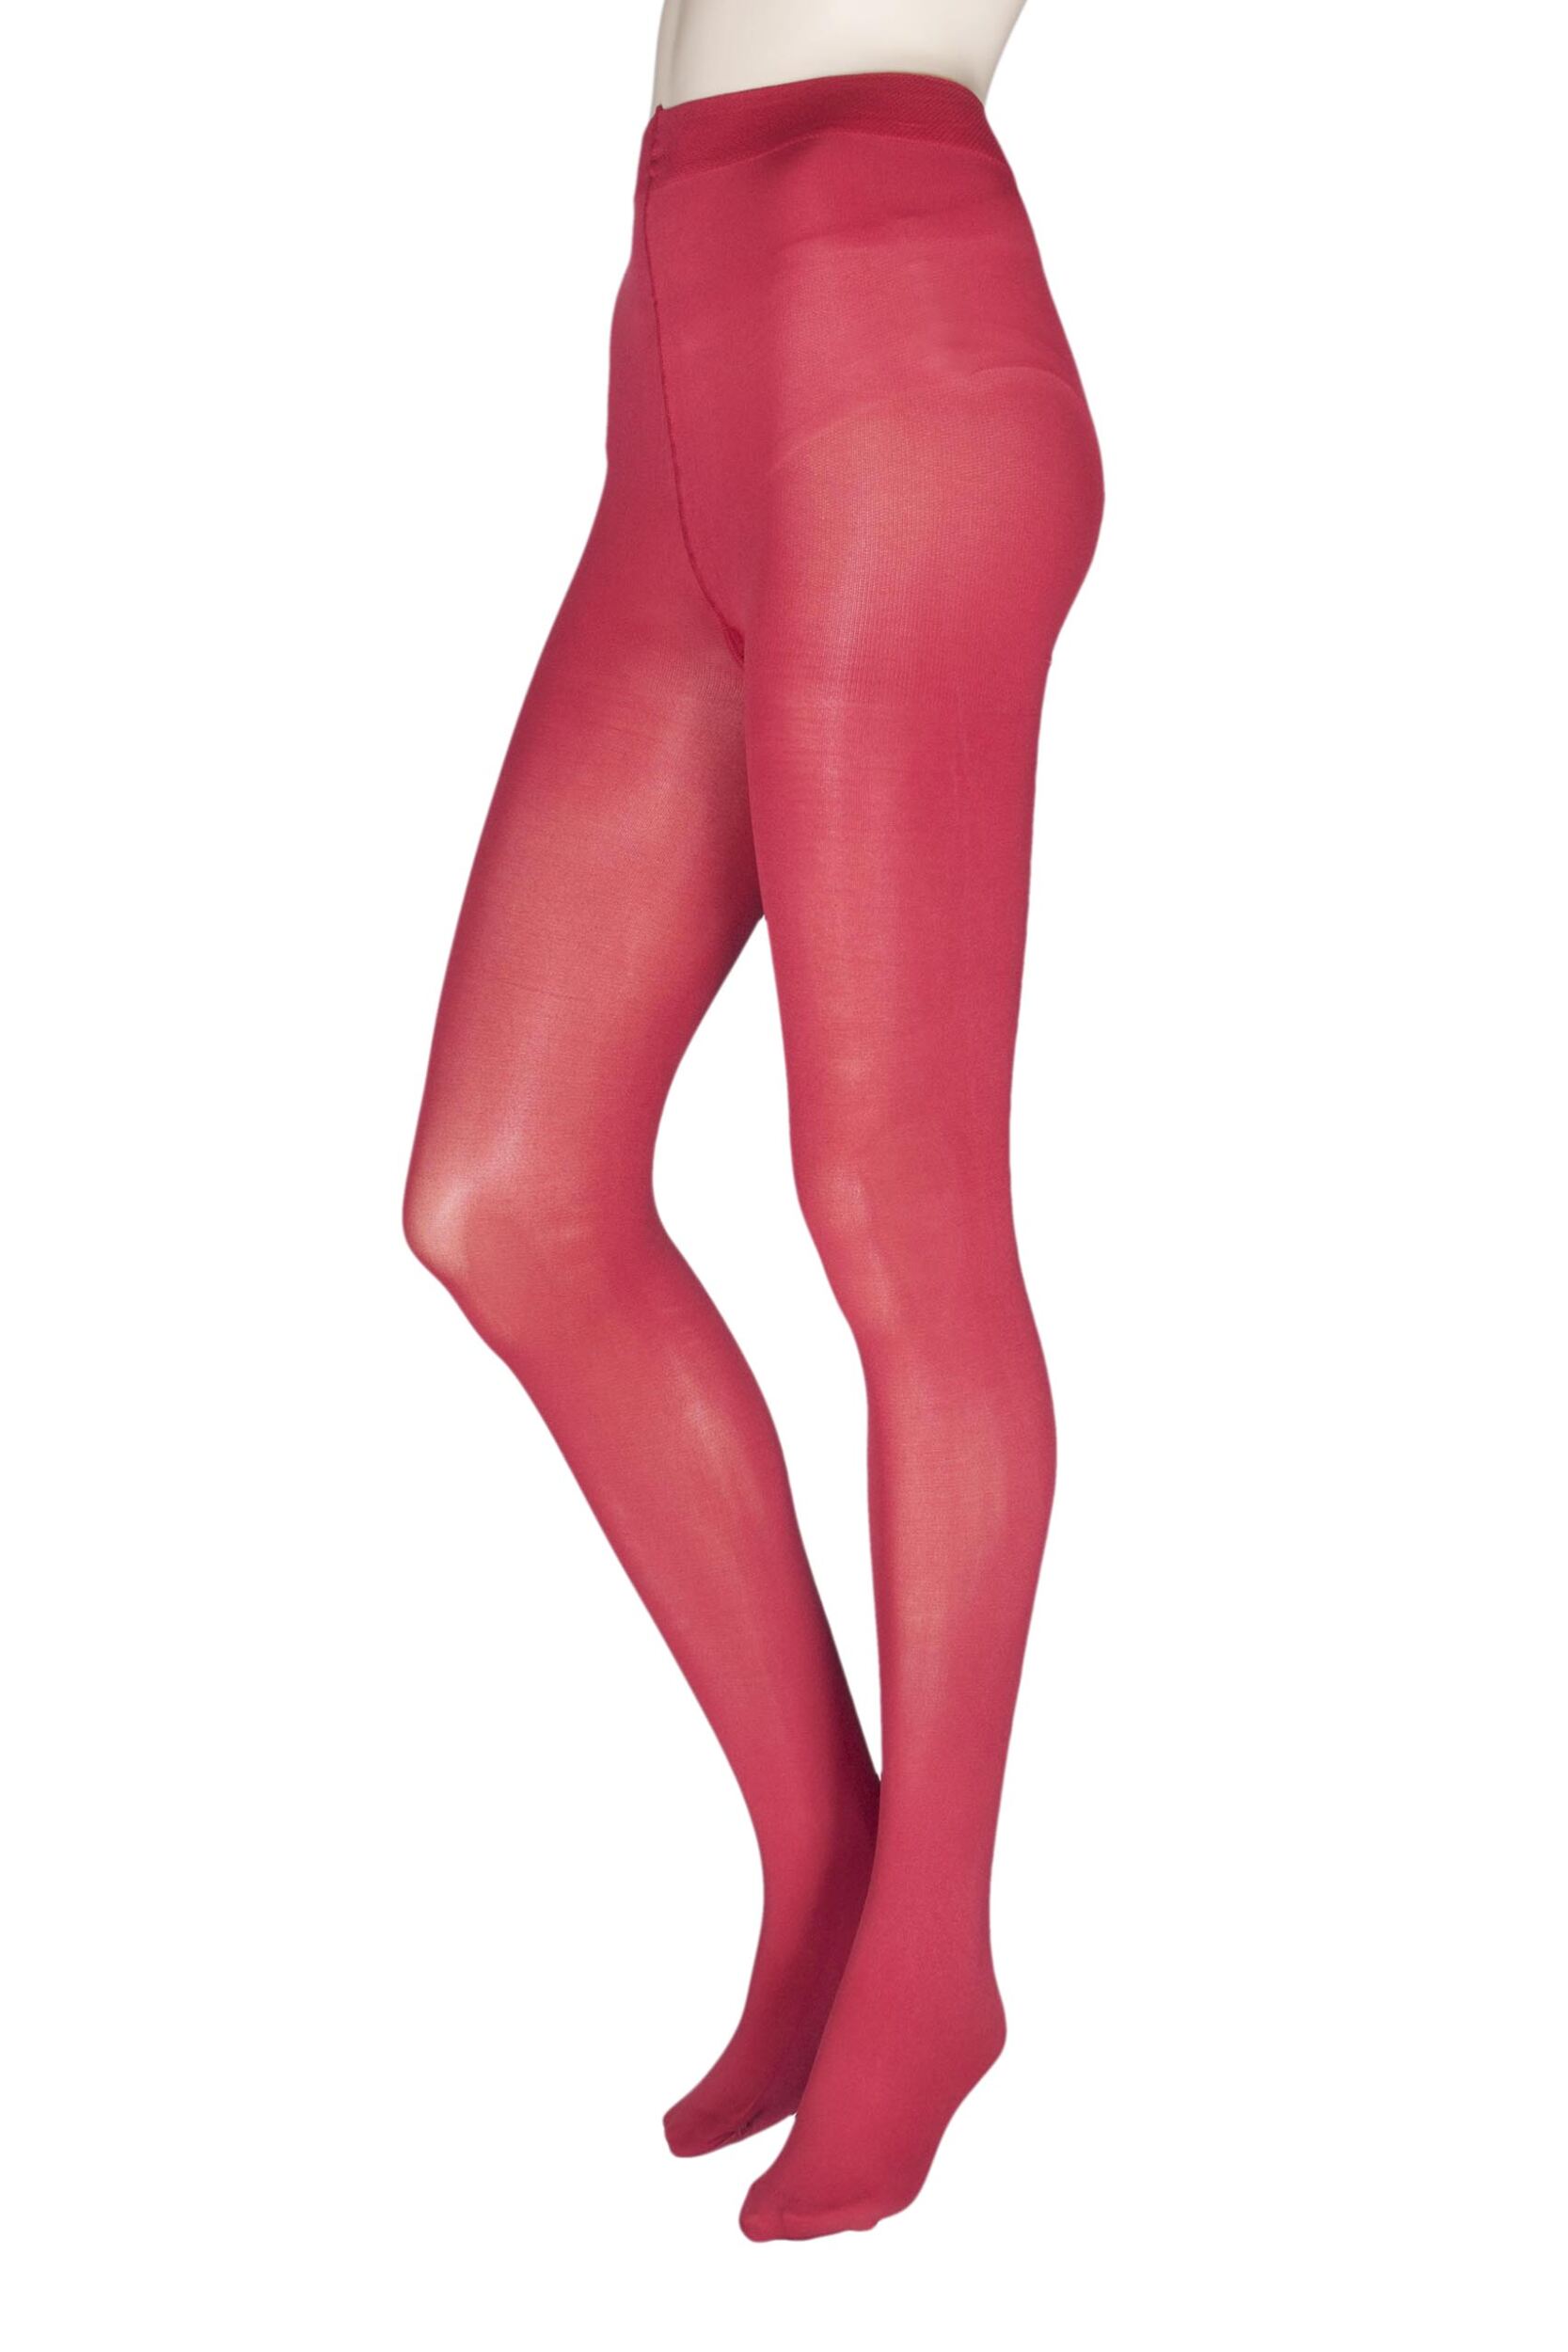 1 Pair Red 60 Denier Opaque Tights Ladies Small - Charnos